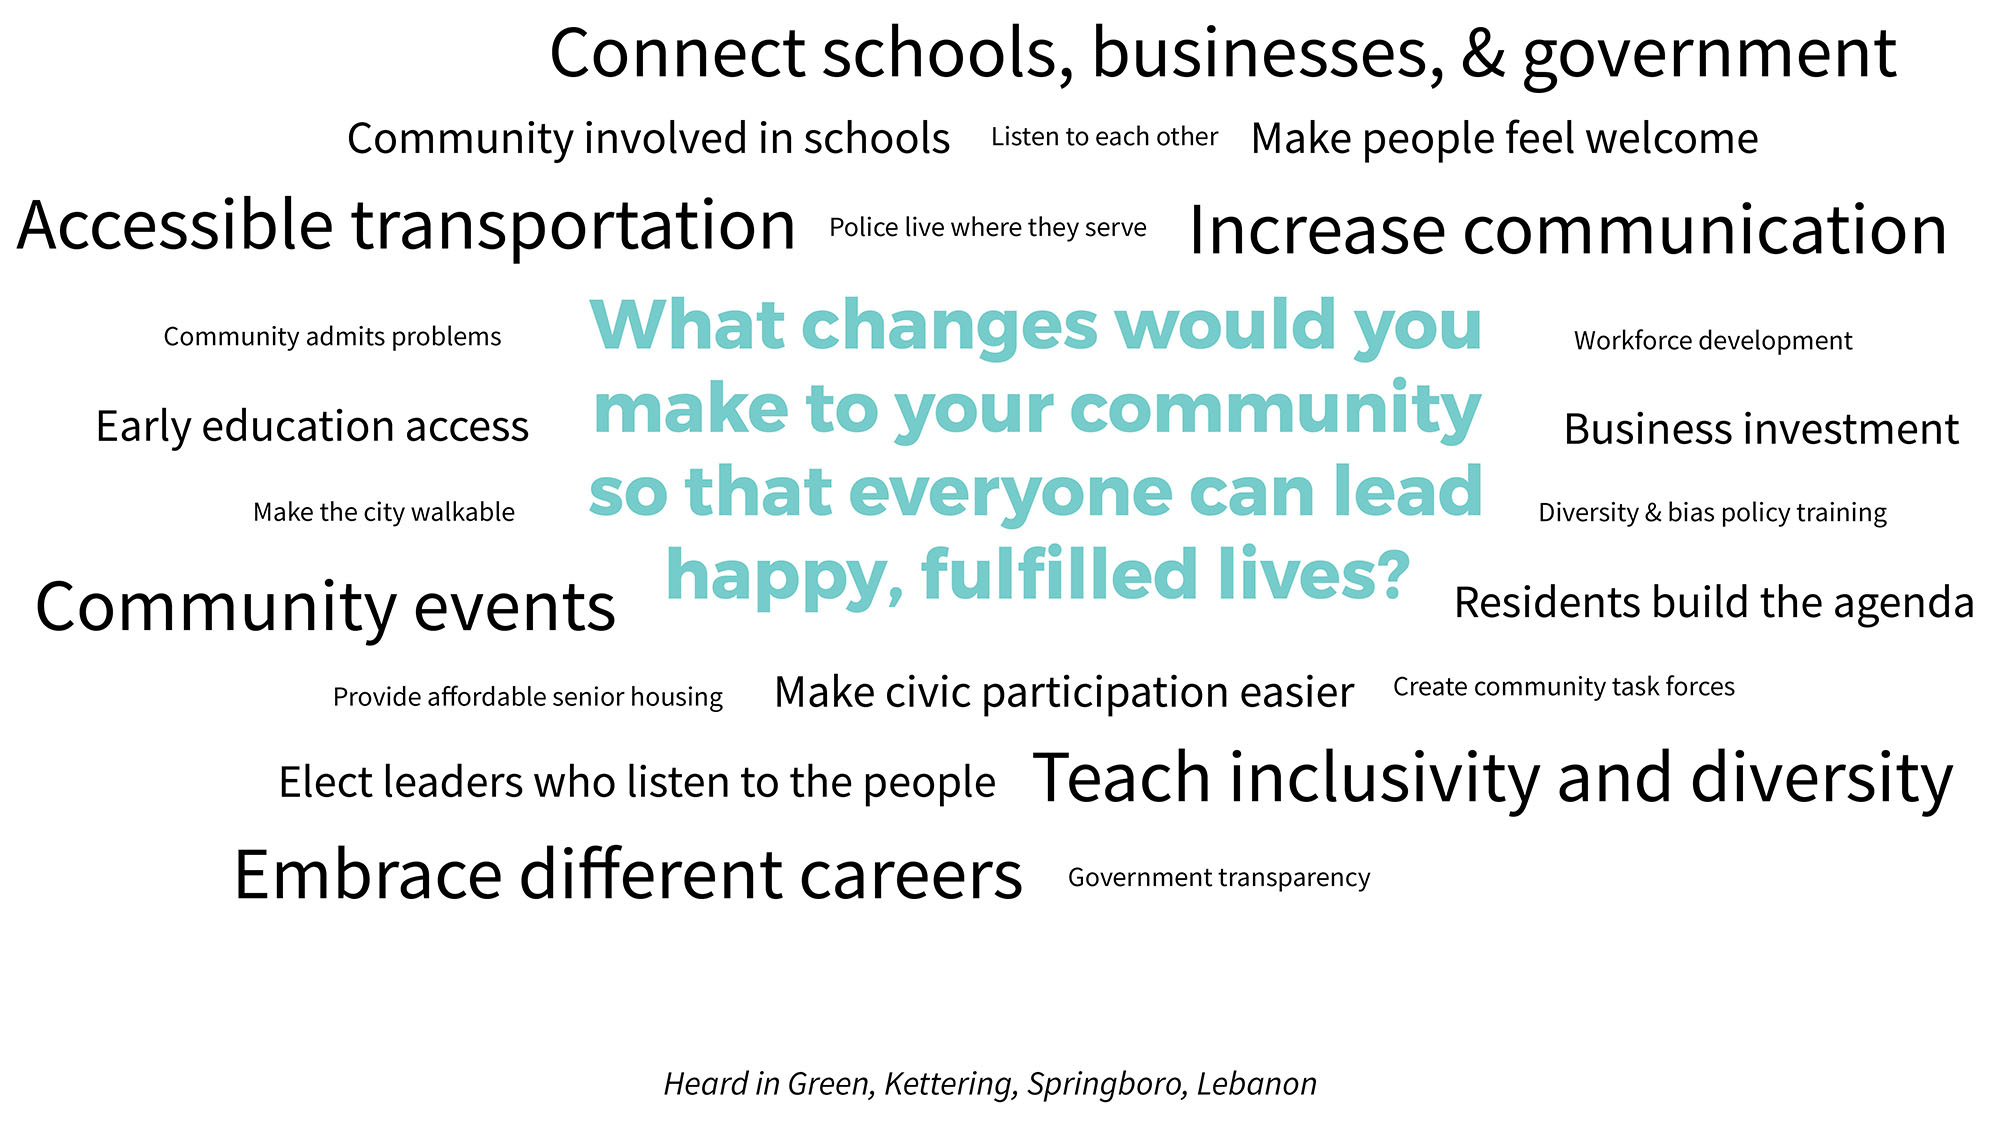 A word cloud describing what changes people would make to their communities so that everyone could be happy.